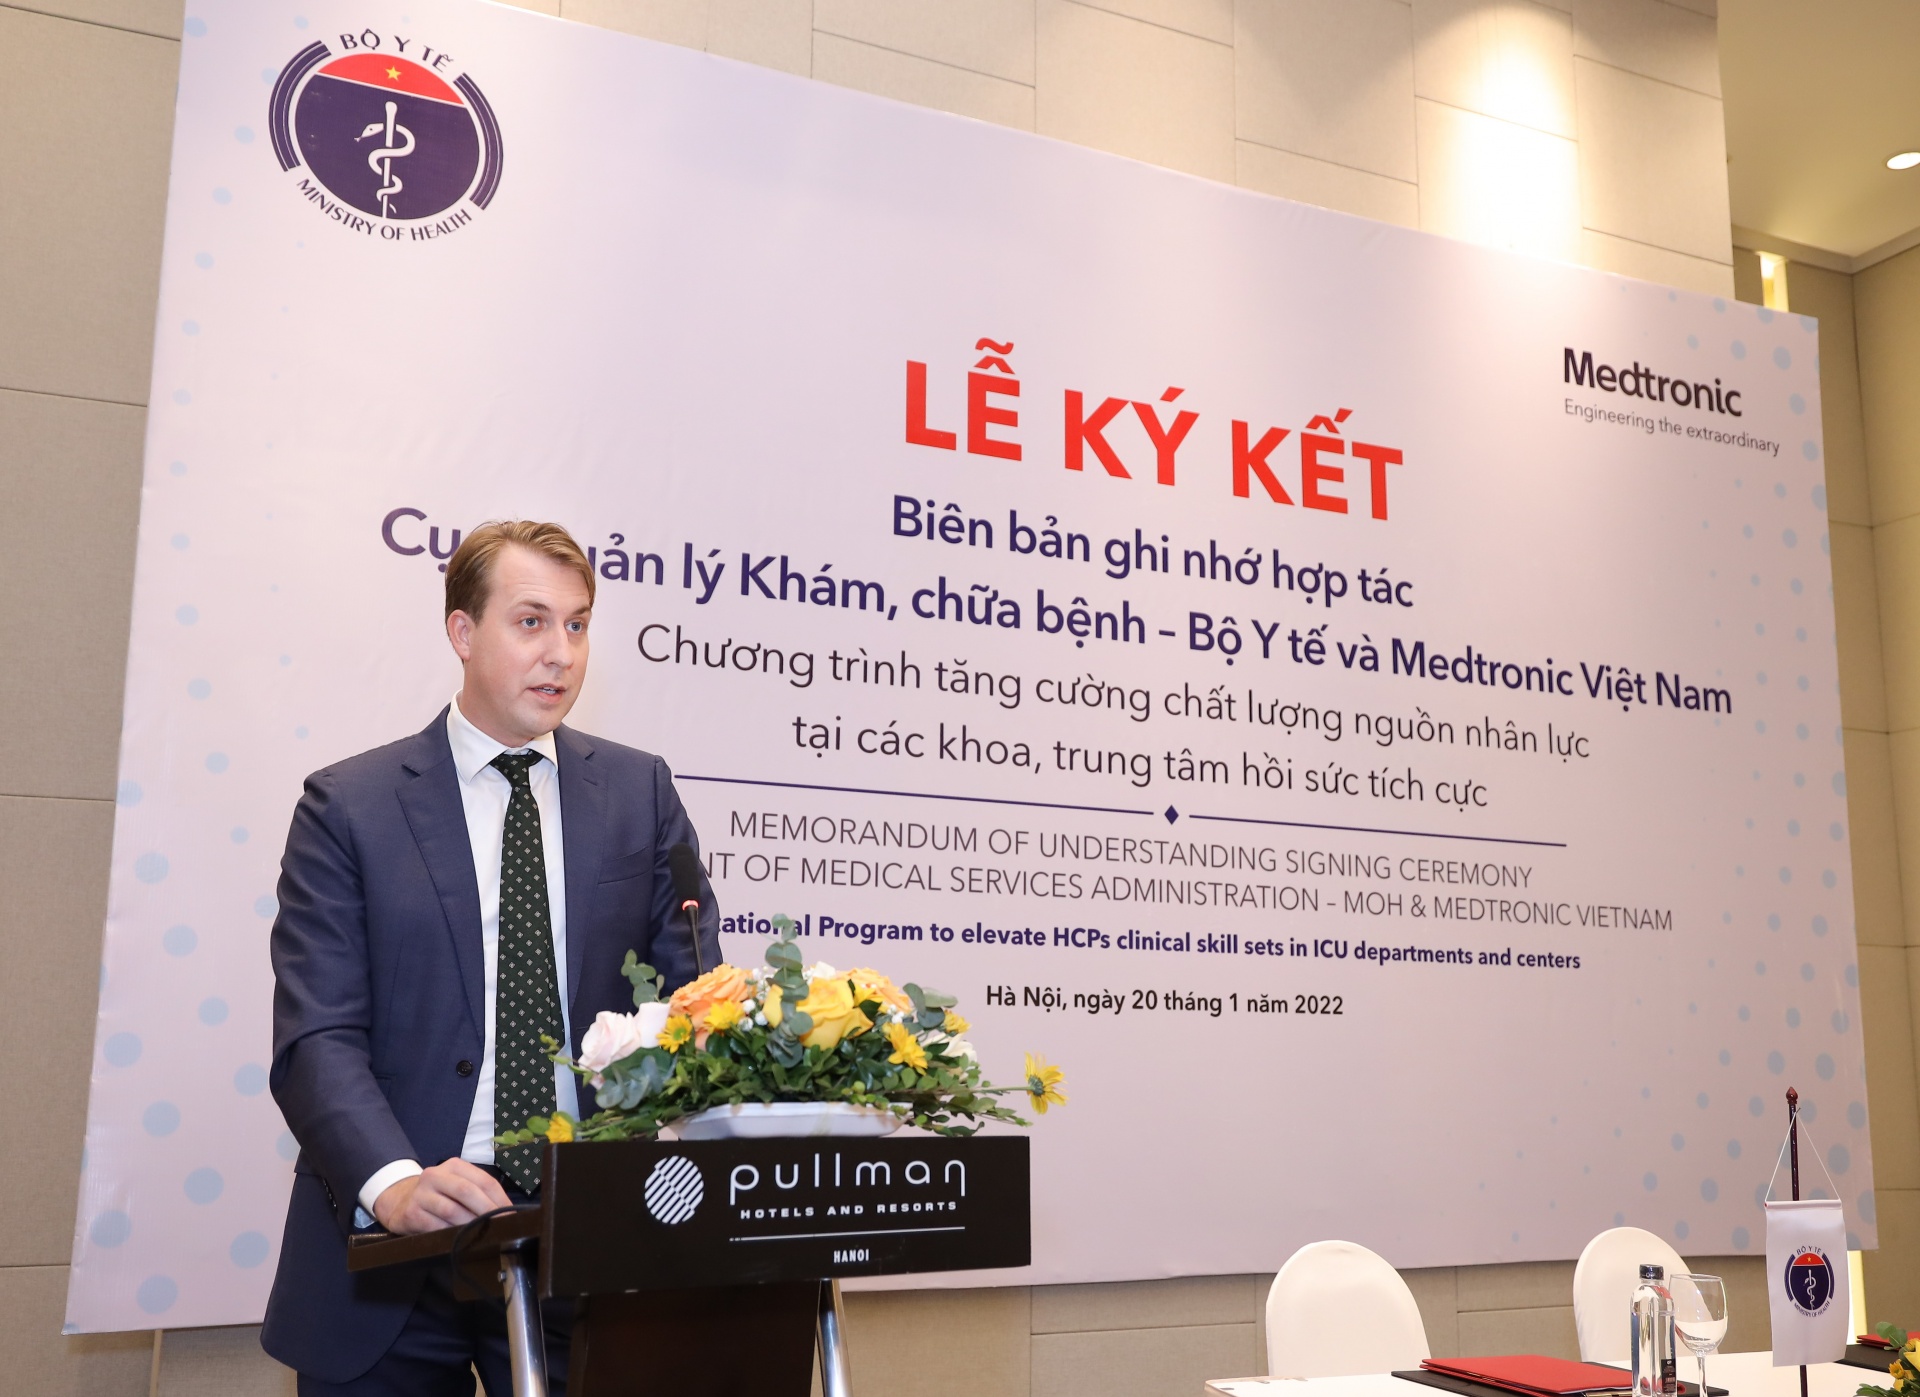 Medtronic Vietnam and Ministry of Health collaborate to elevate clinical skills among professionals